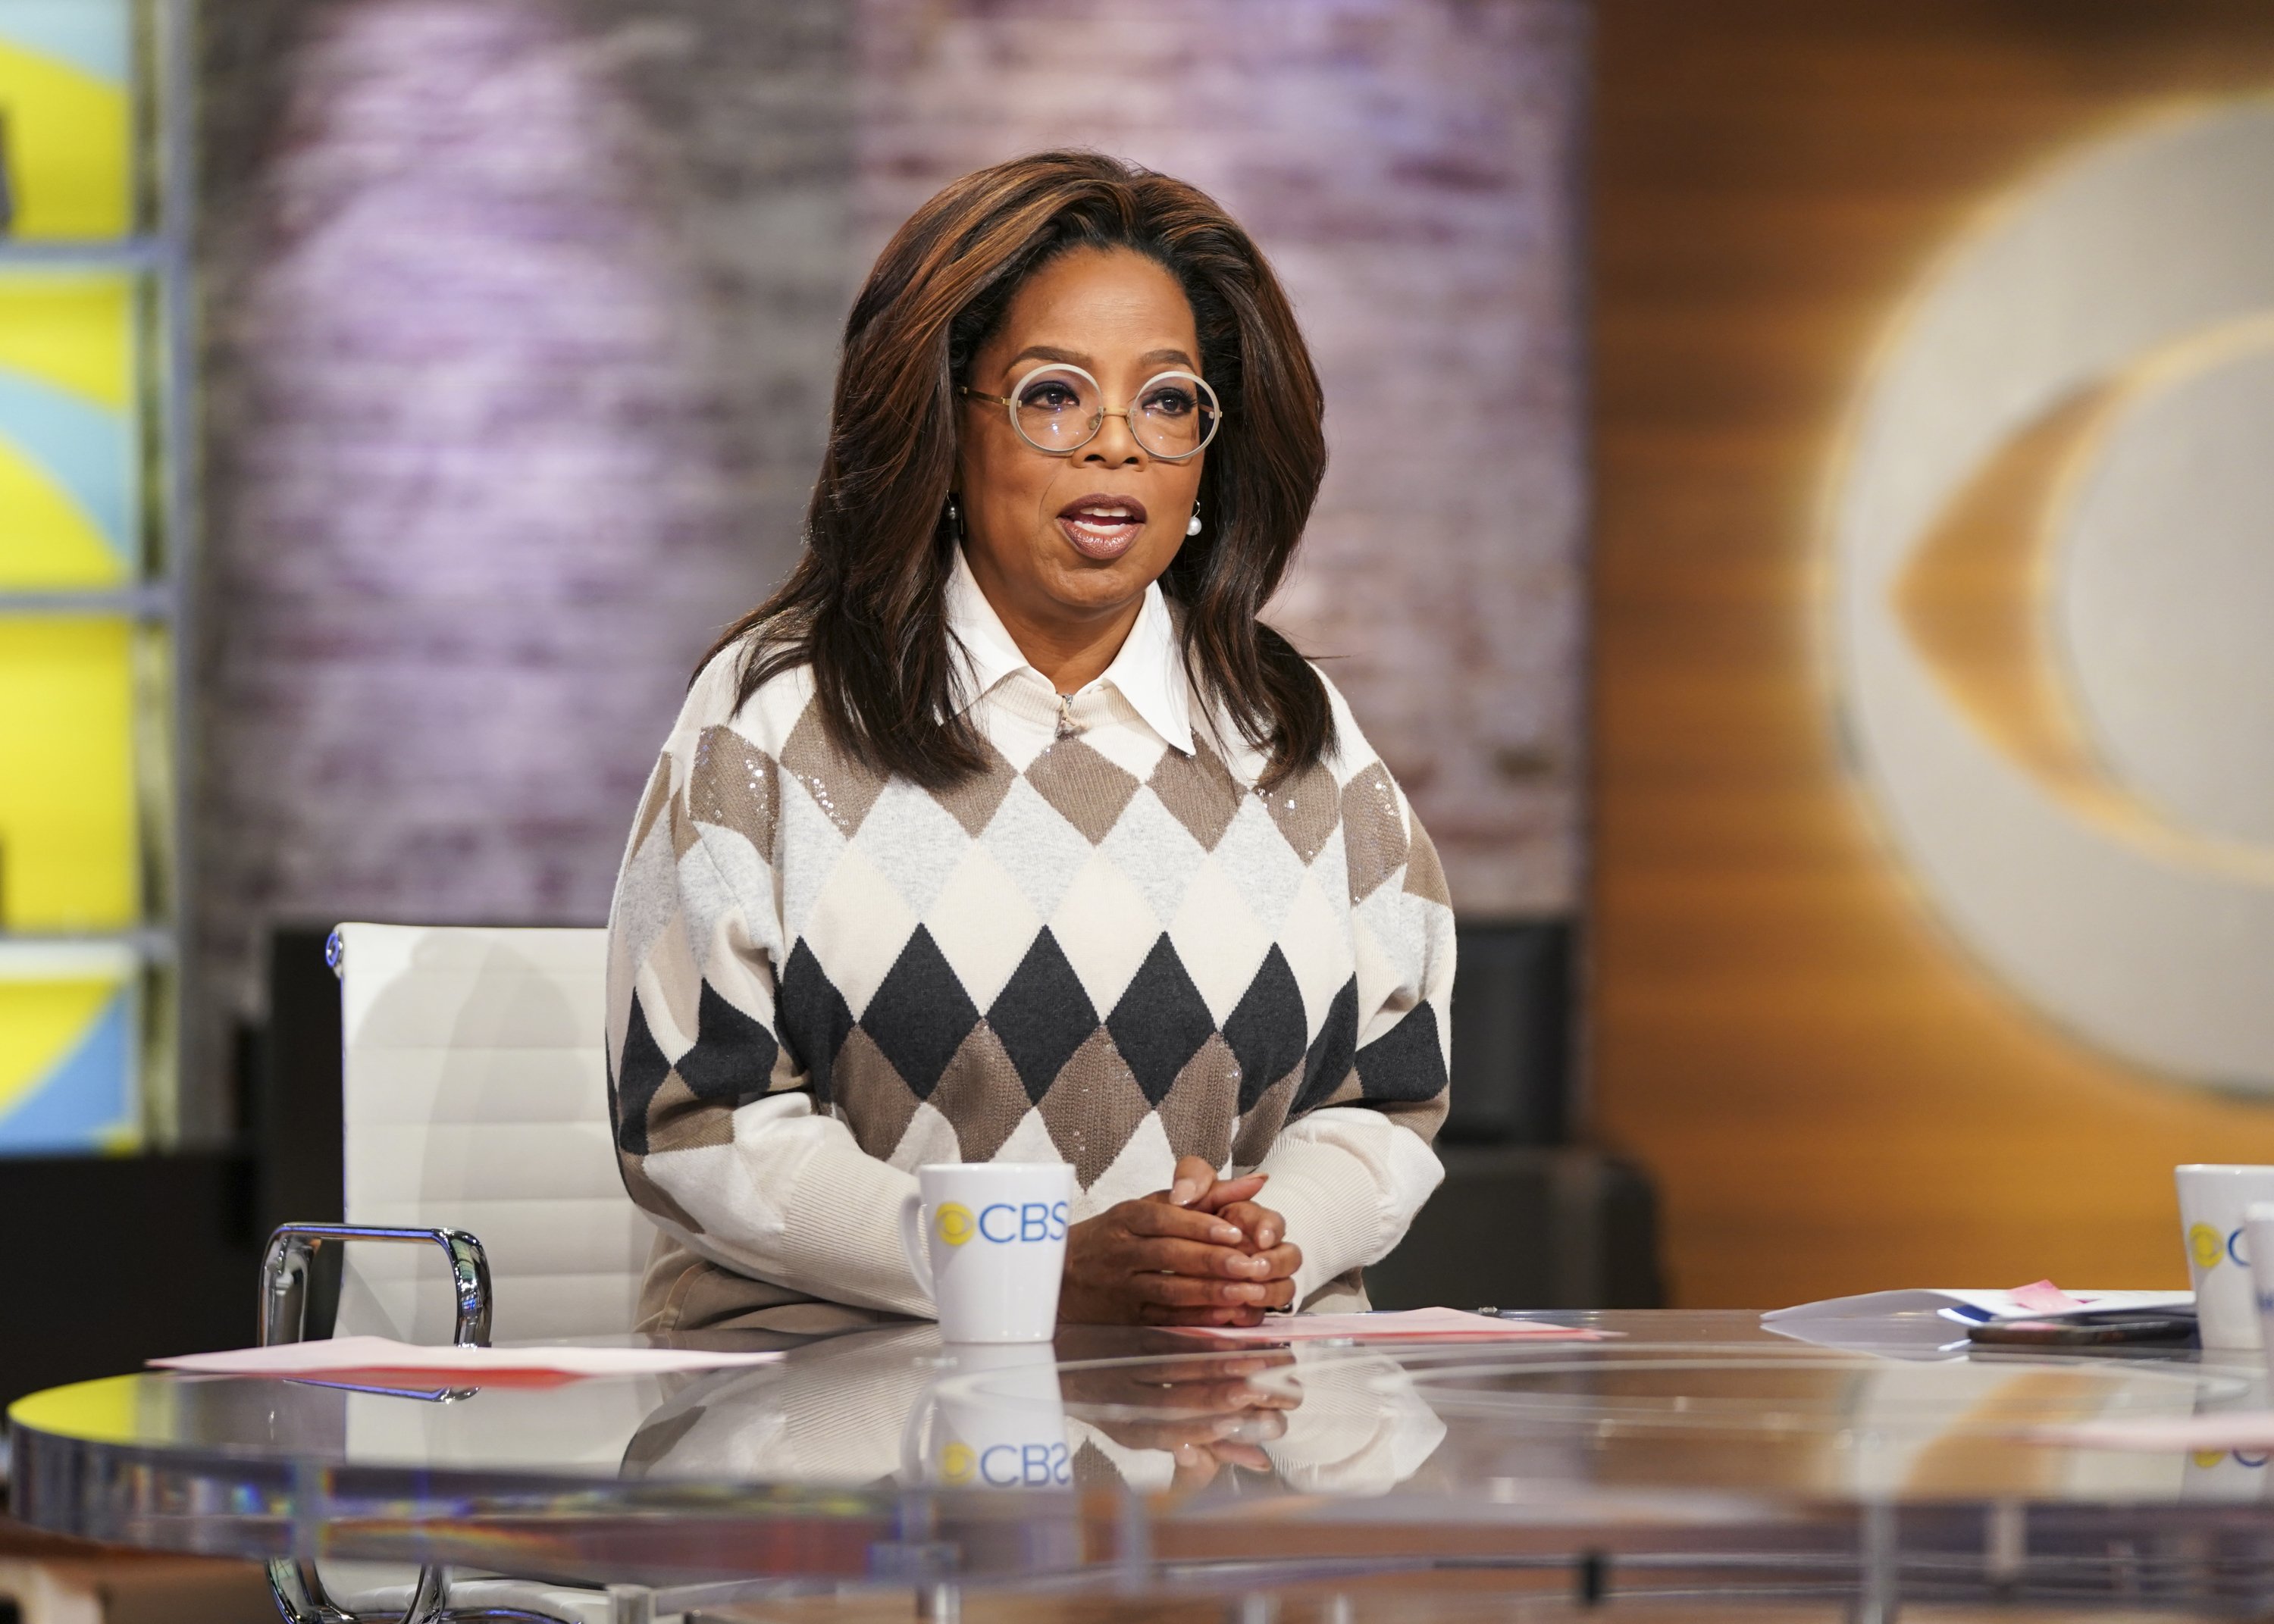 Oprah Winfrey on the set of "CBS This Morning" with Gayle King | Source: Getty Images/GlobalImagesUkraine